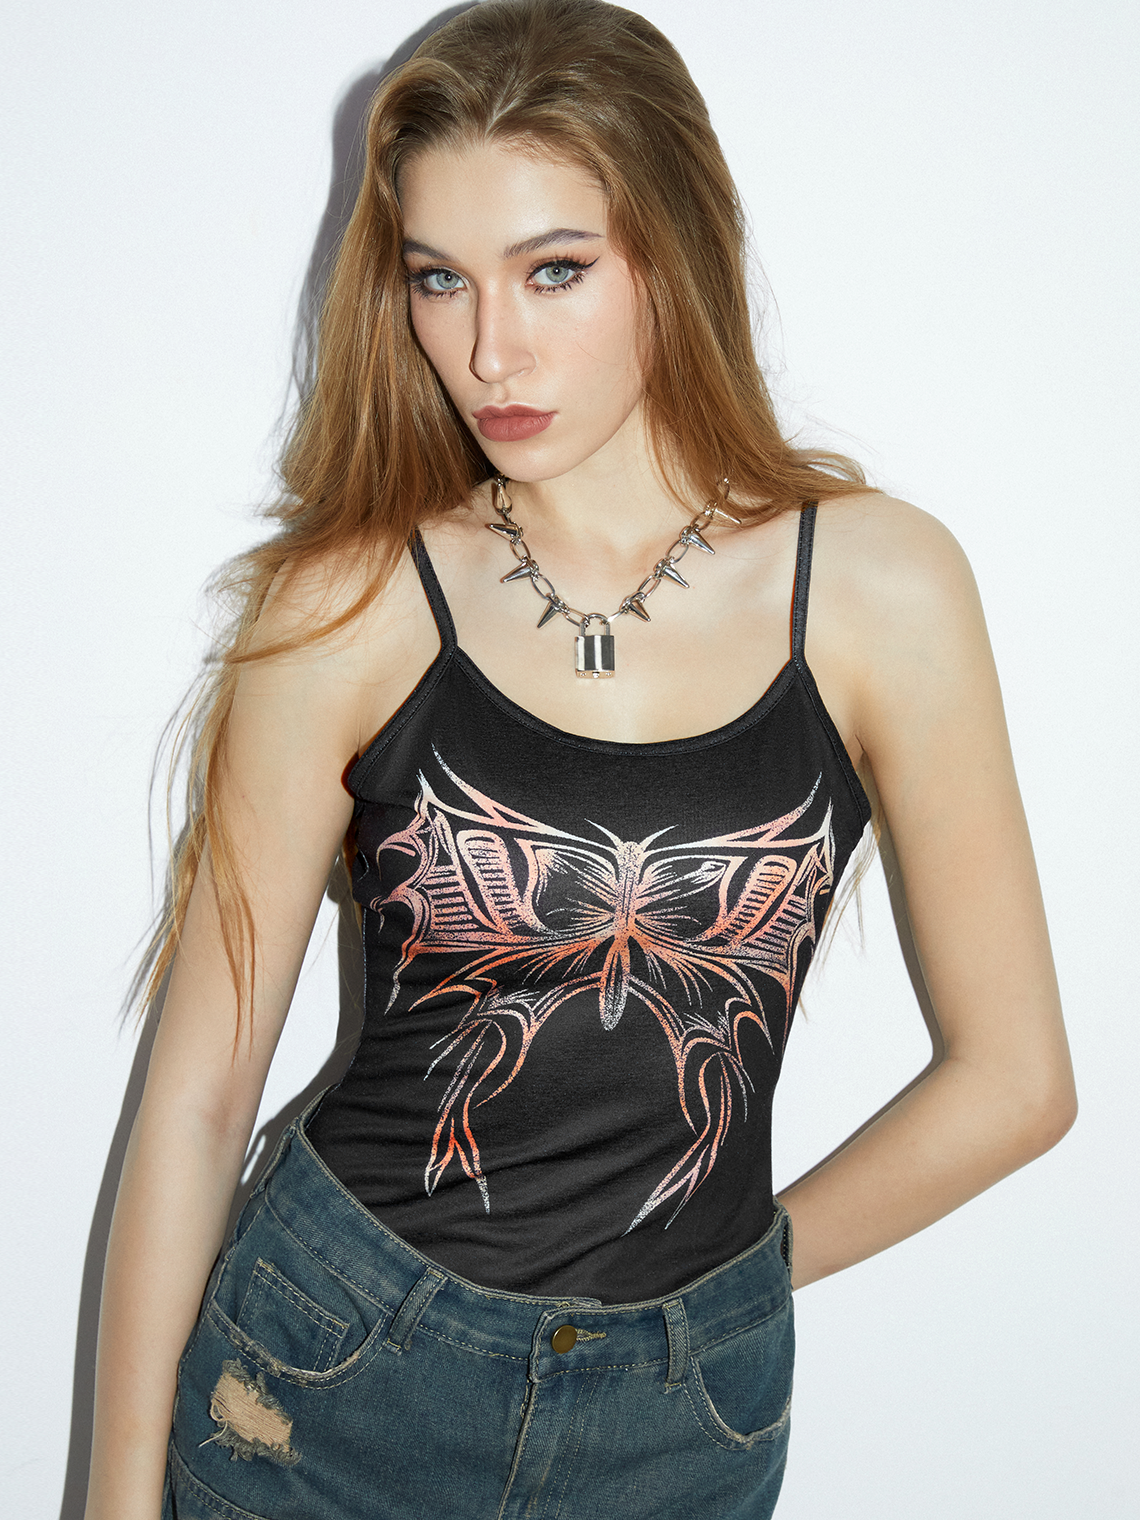 【Final Sale】Y2K Black Butterfly Painting Top Tank Top & Cami